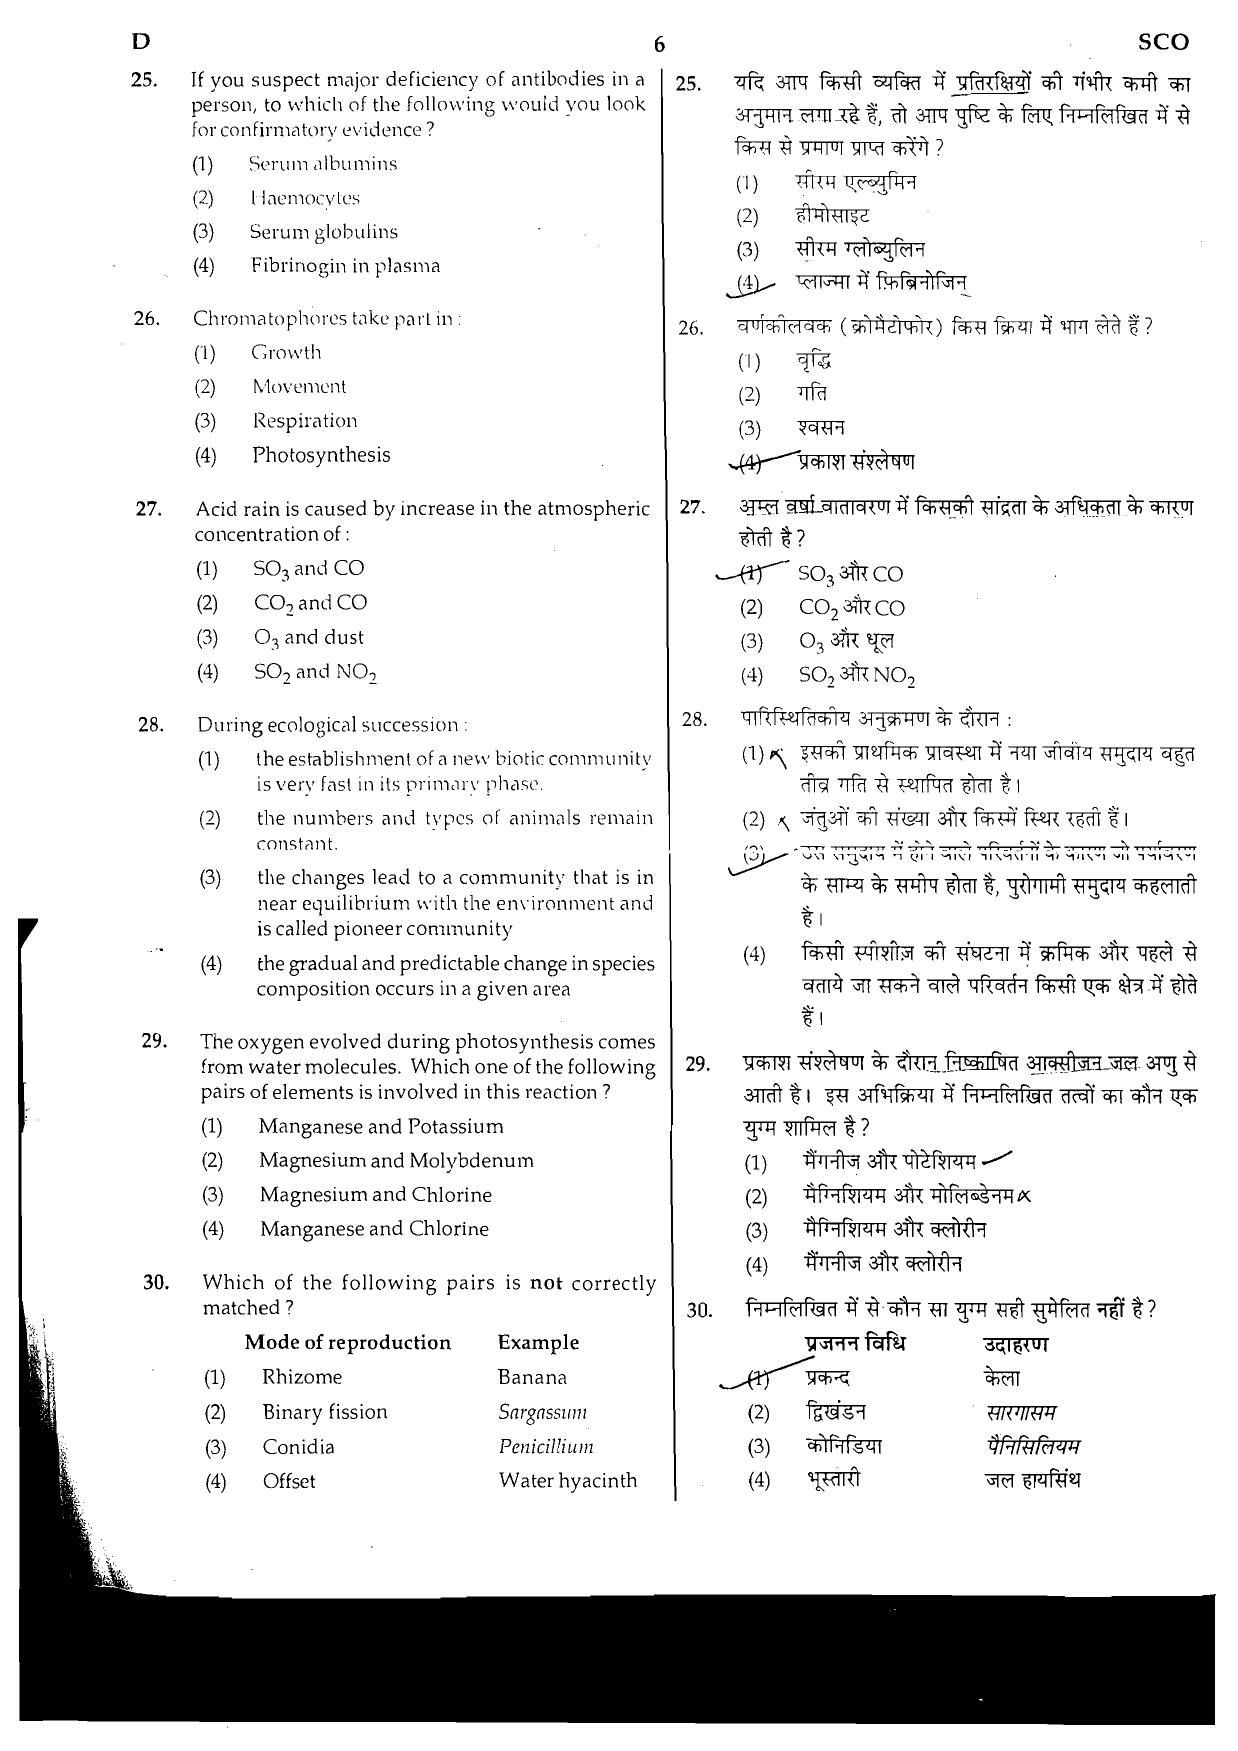 NEET Code D 2015 Question Paper - Page 6